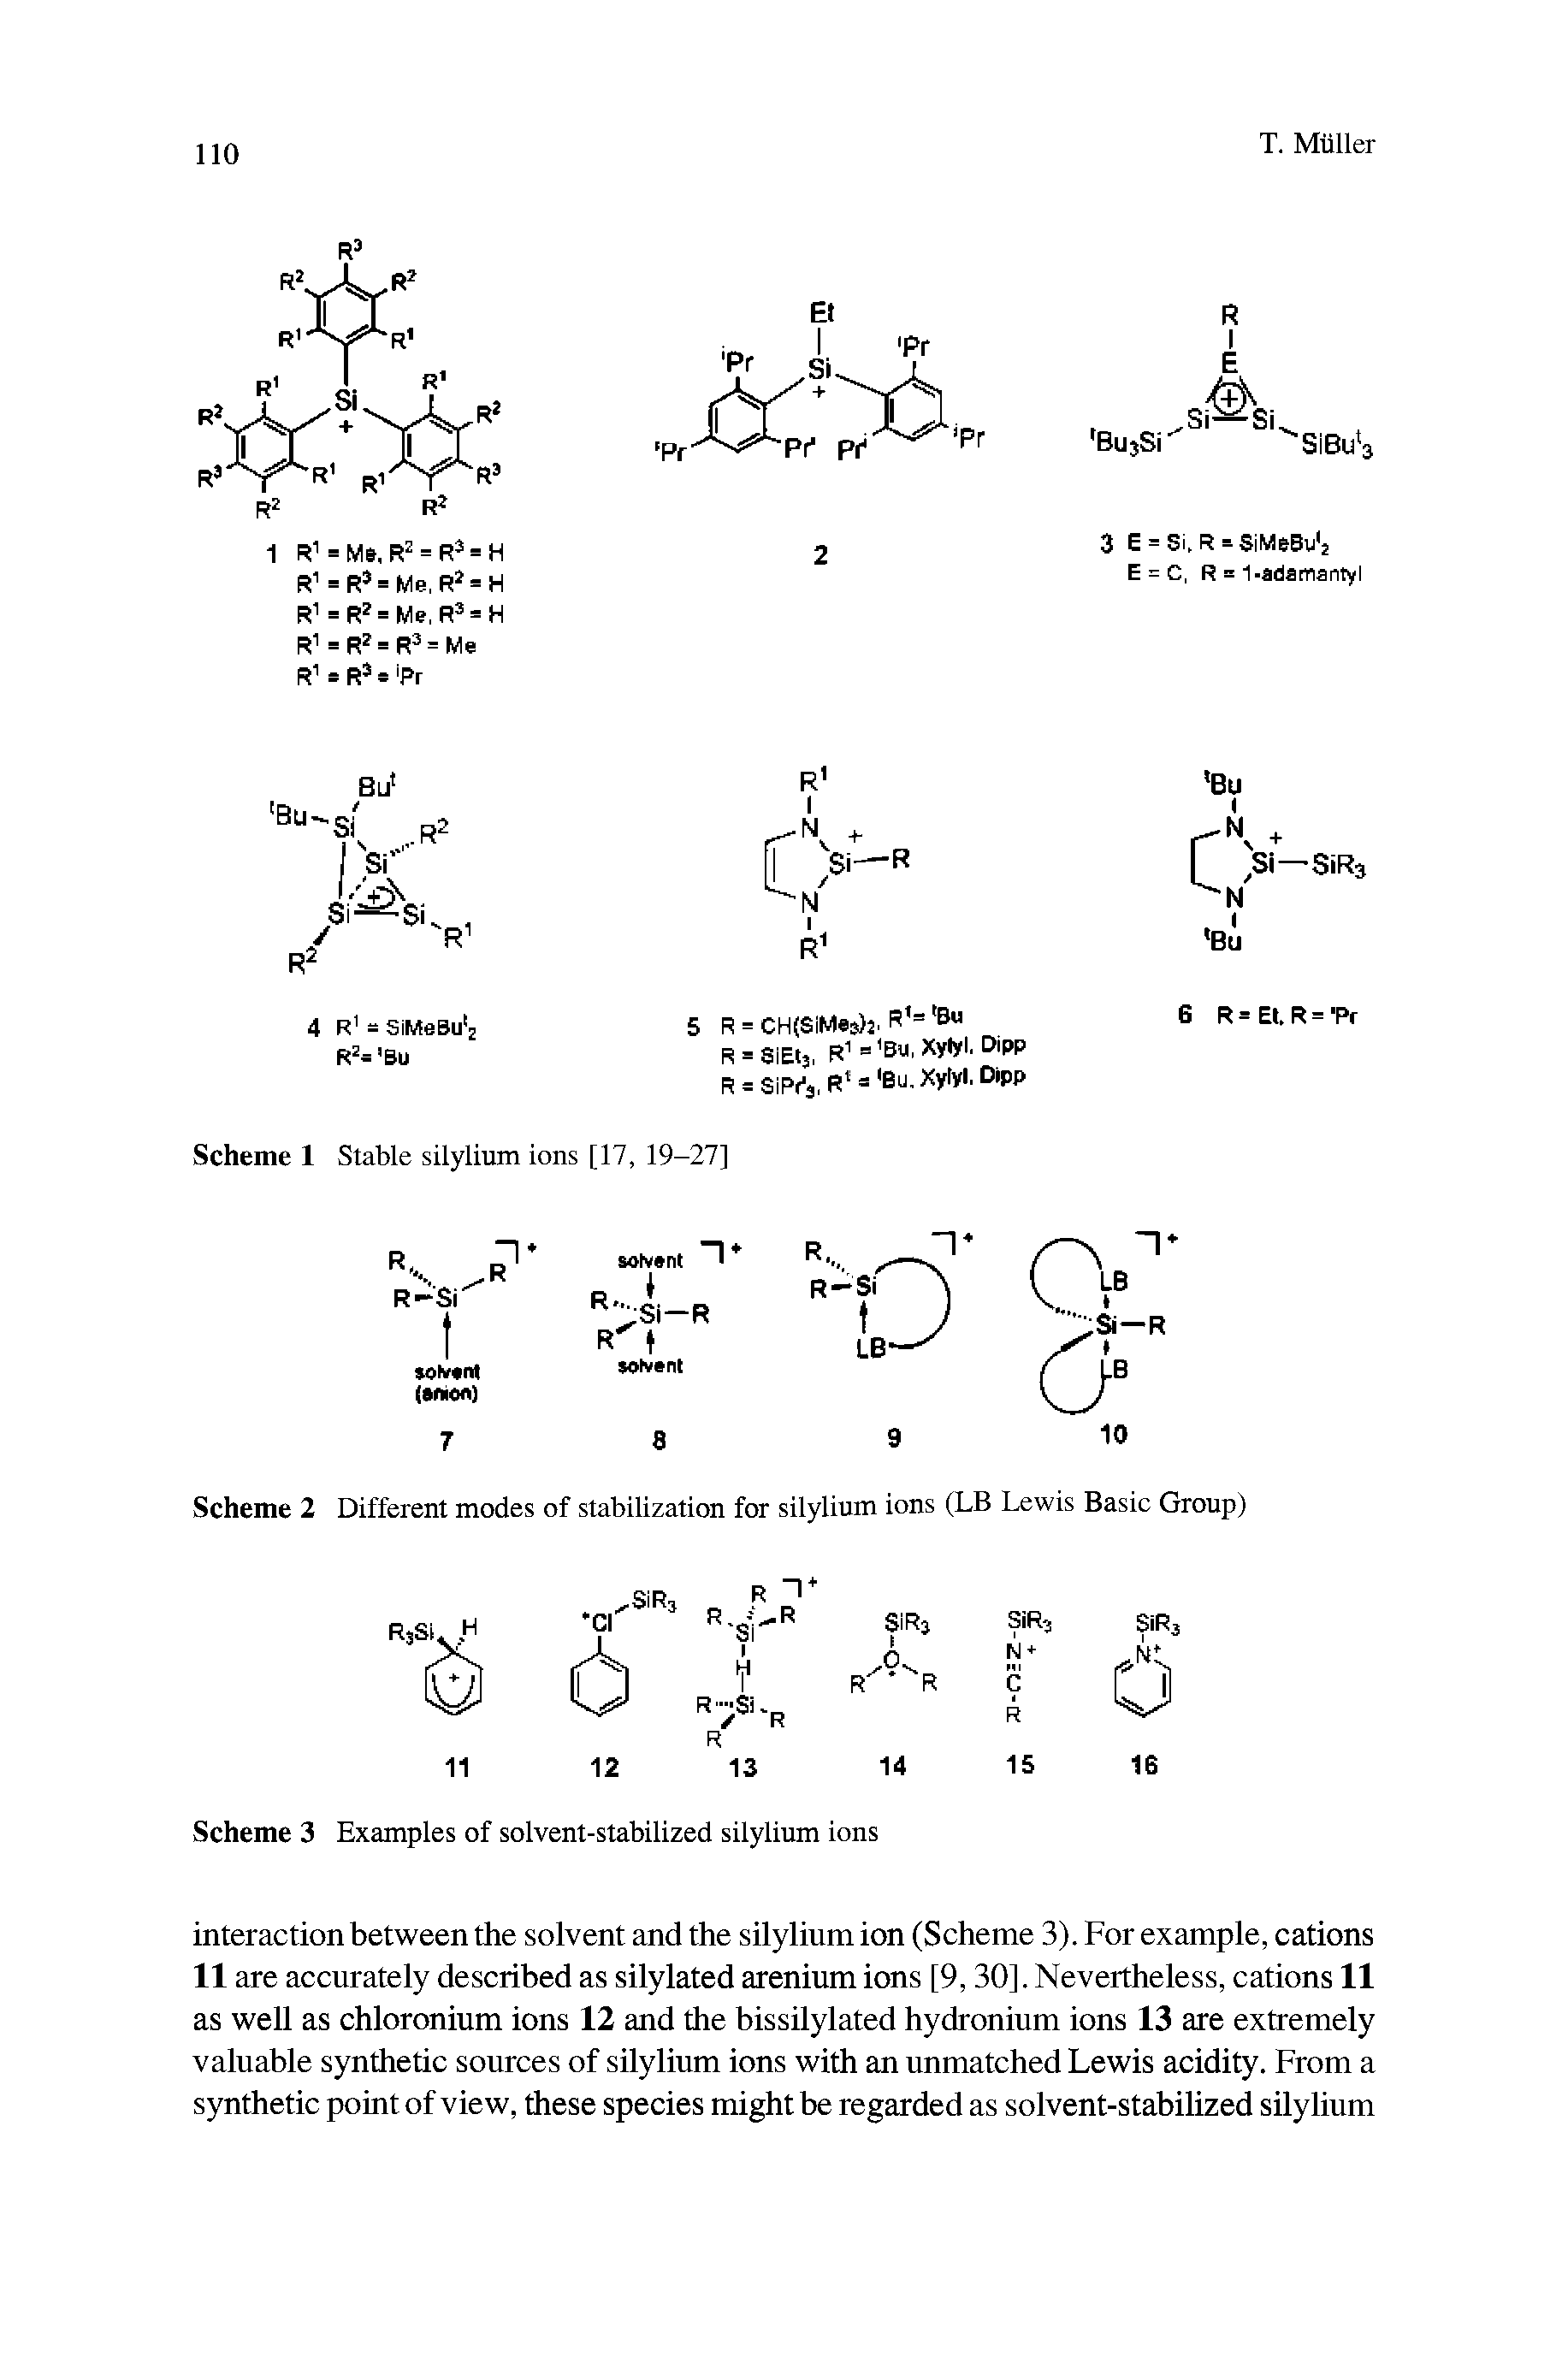 Scheme 2 Different modes of stabilization for silylium ions (LB Lewis Basic Group)...